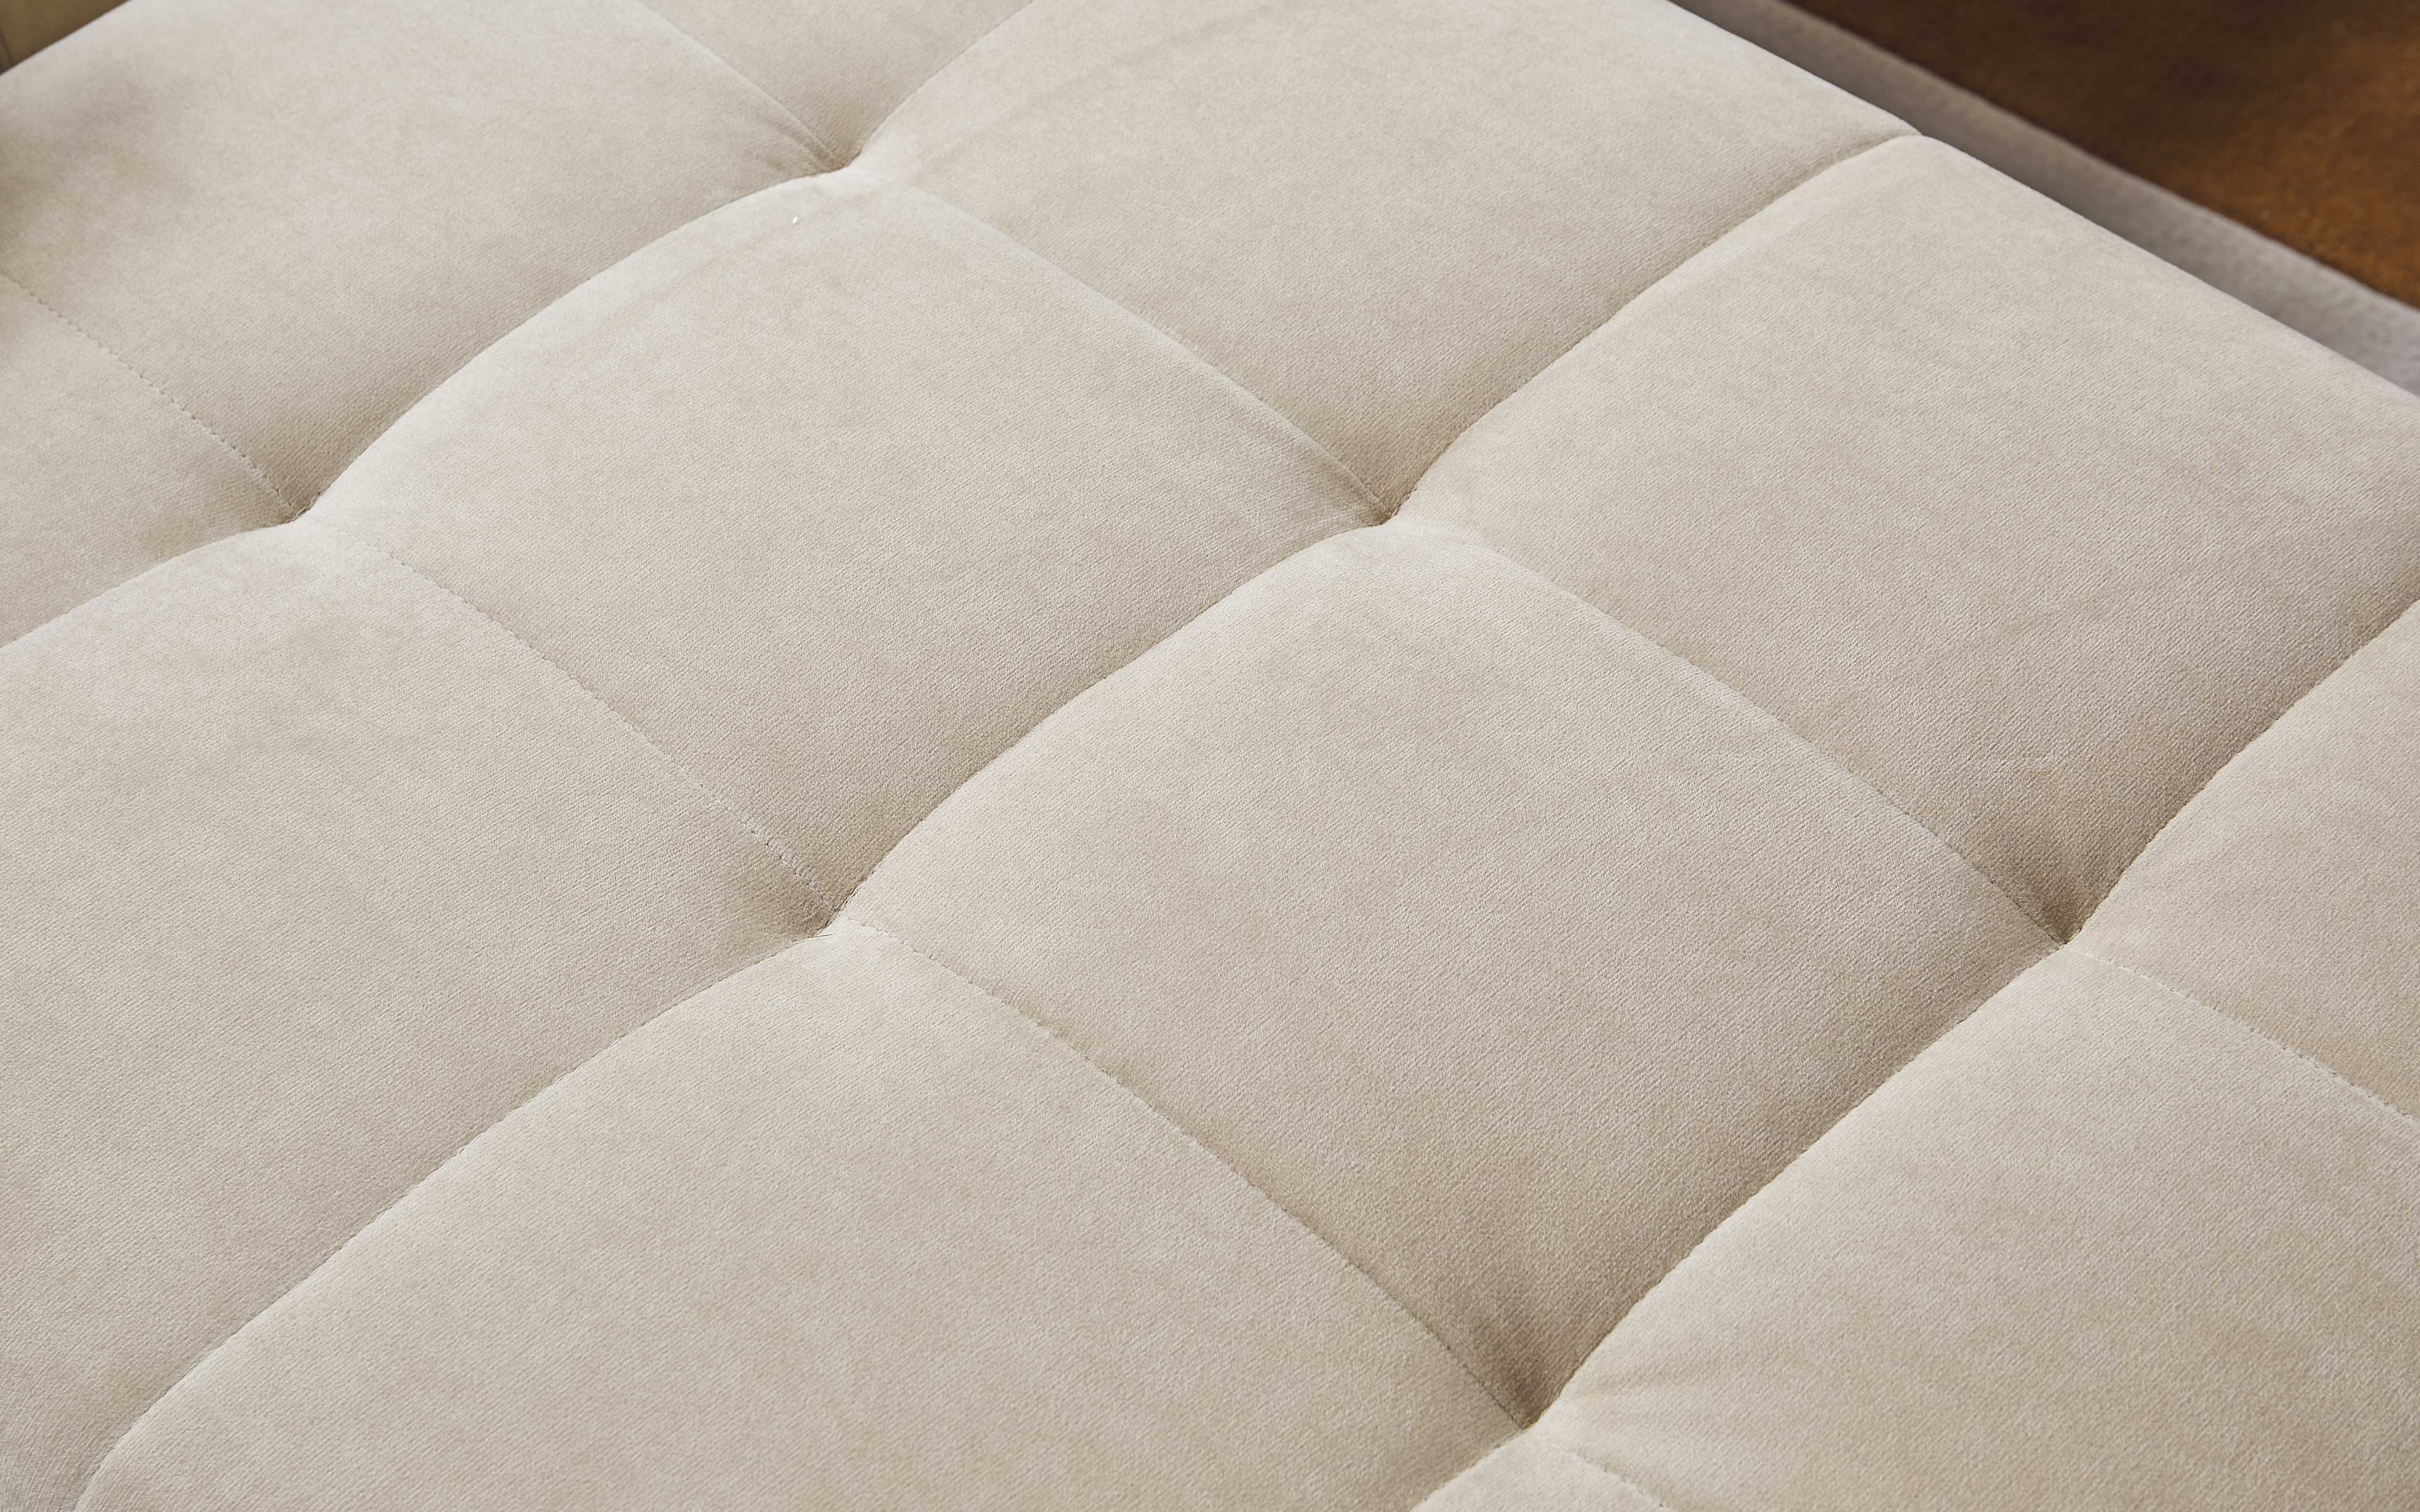 Orion Beige & White Modular Tufted Sectional